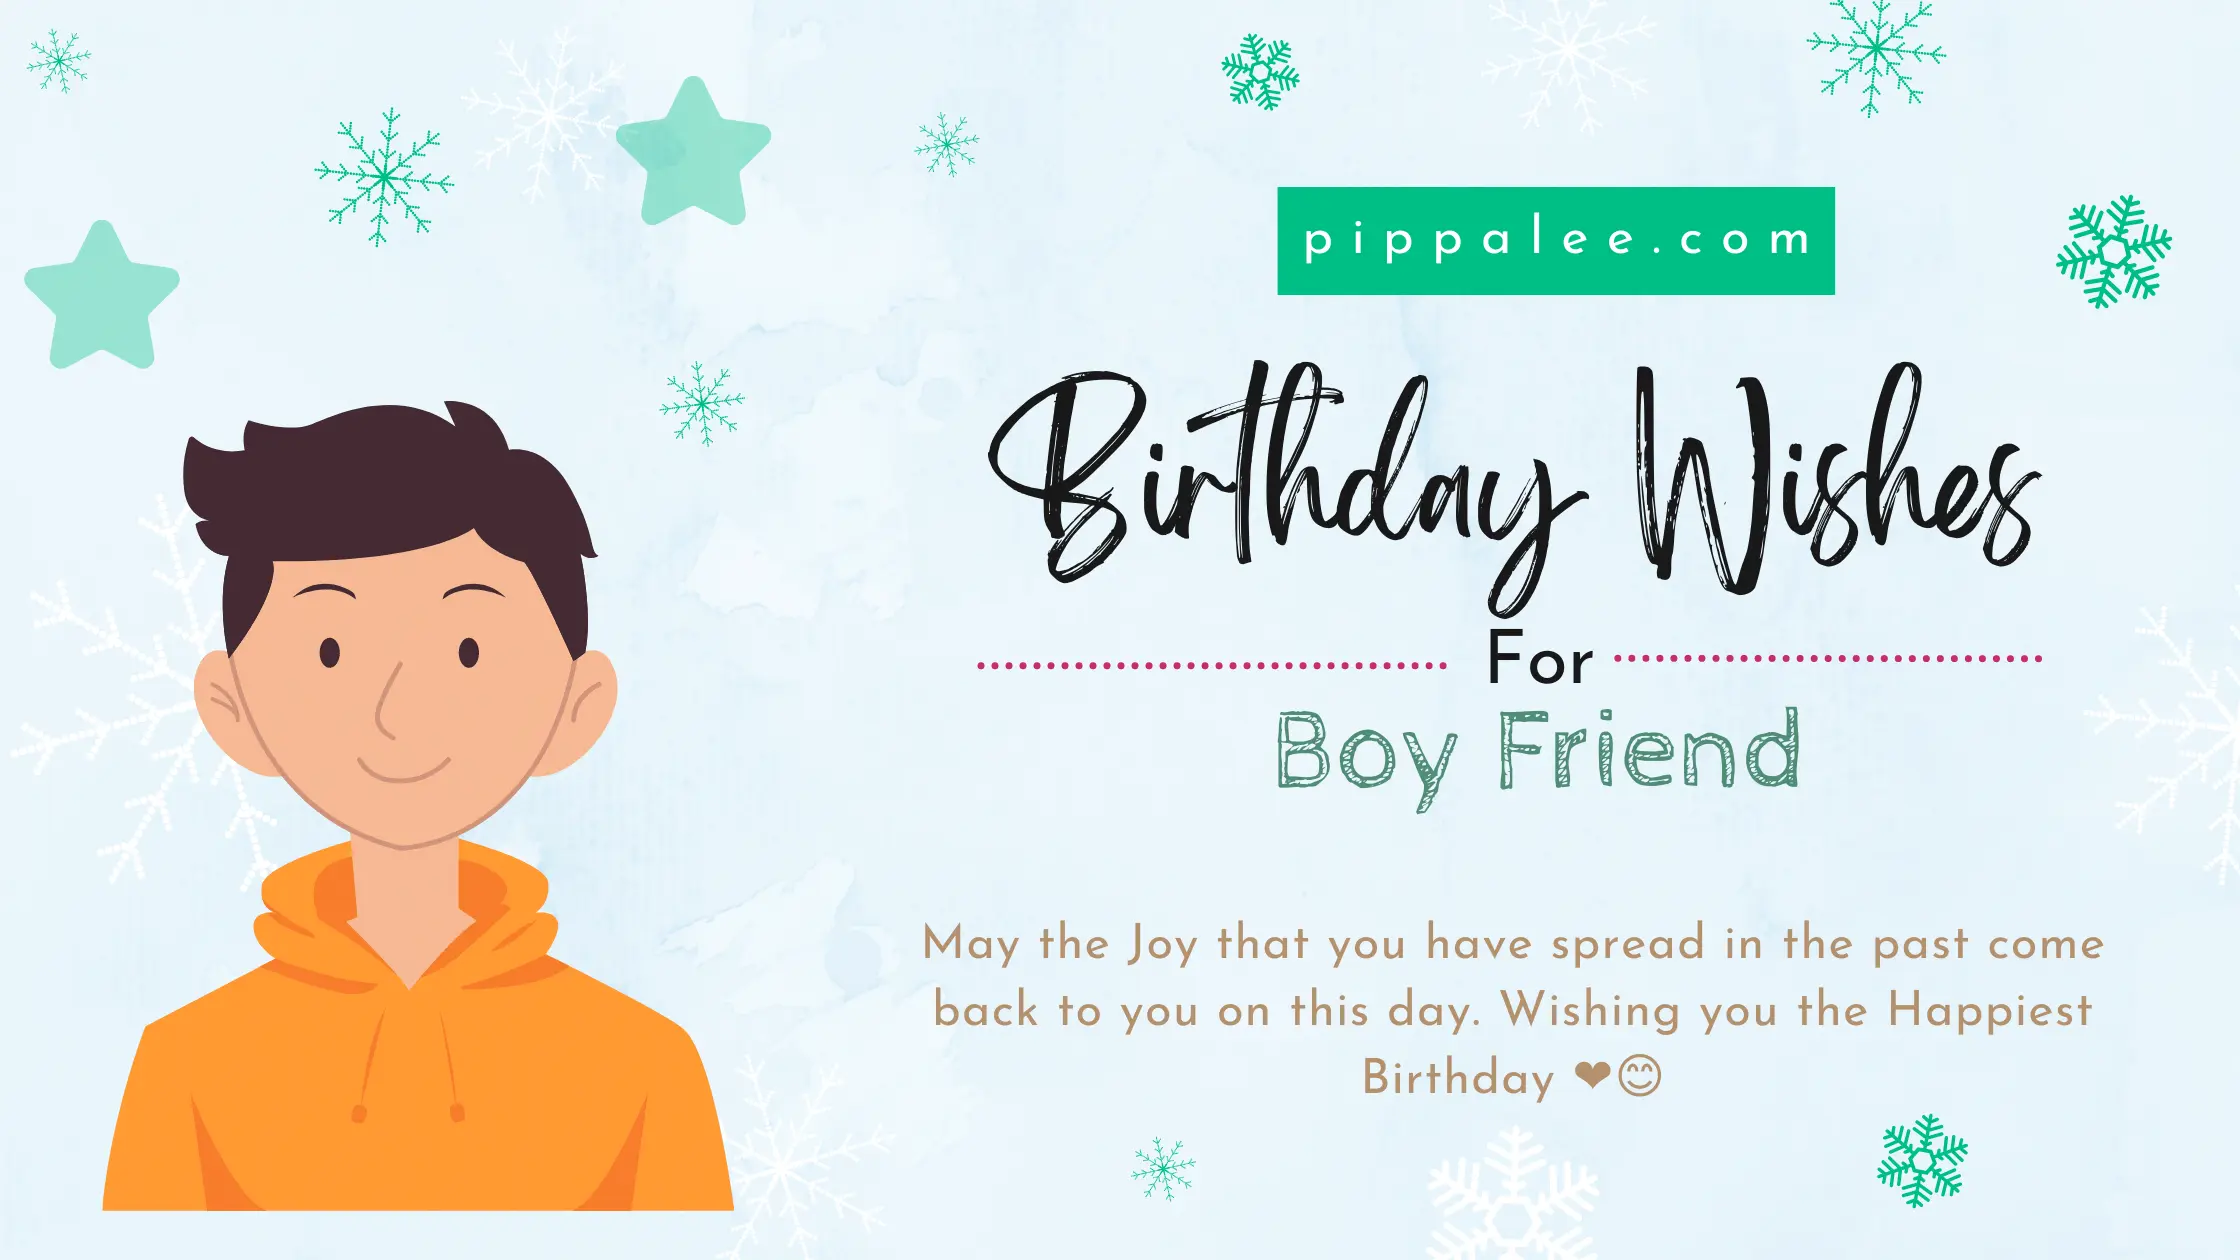 Birthday Wishes For Boy Friend - Special Messages